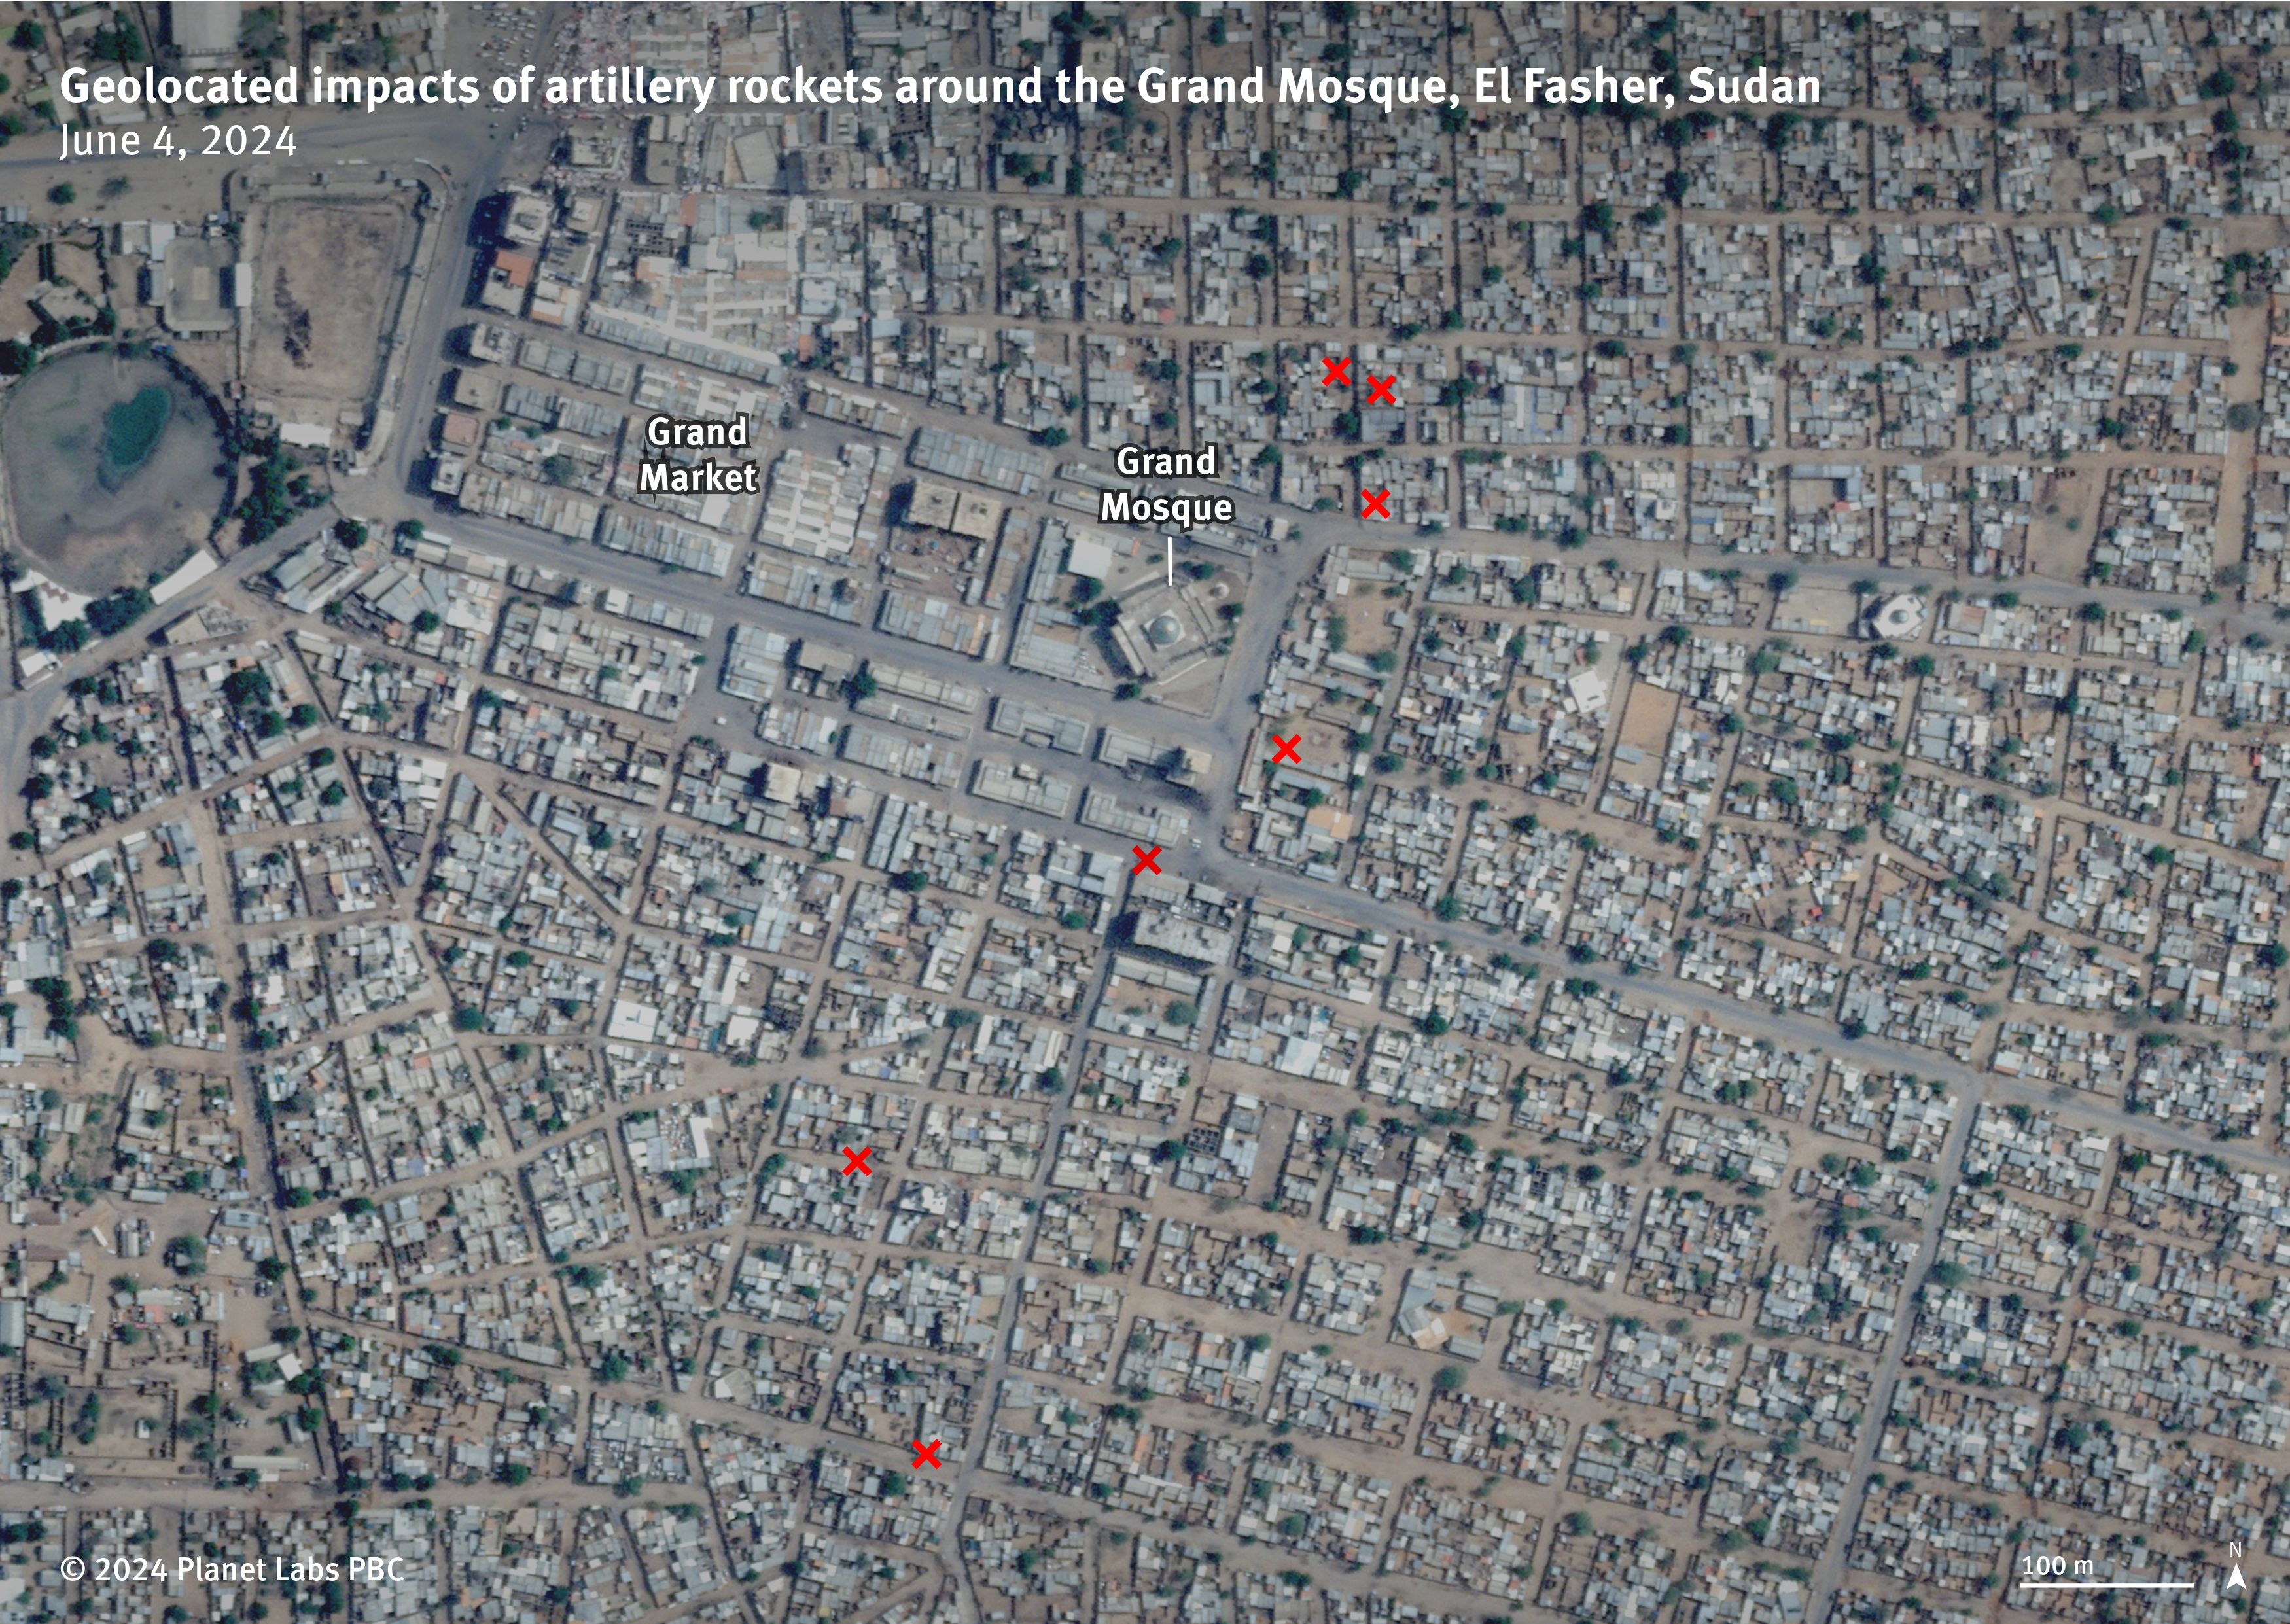 Human Rights Watch geolocated from a video the impacts of artillery rockets hitting residentials areas on June 3 around the Grand Mosque and Grand Market in central El Fasher, North Darfur, Sudan. 